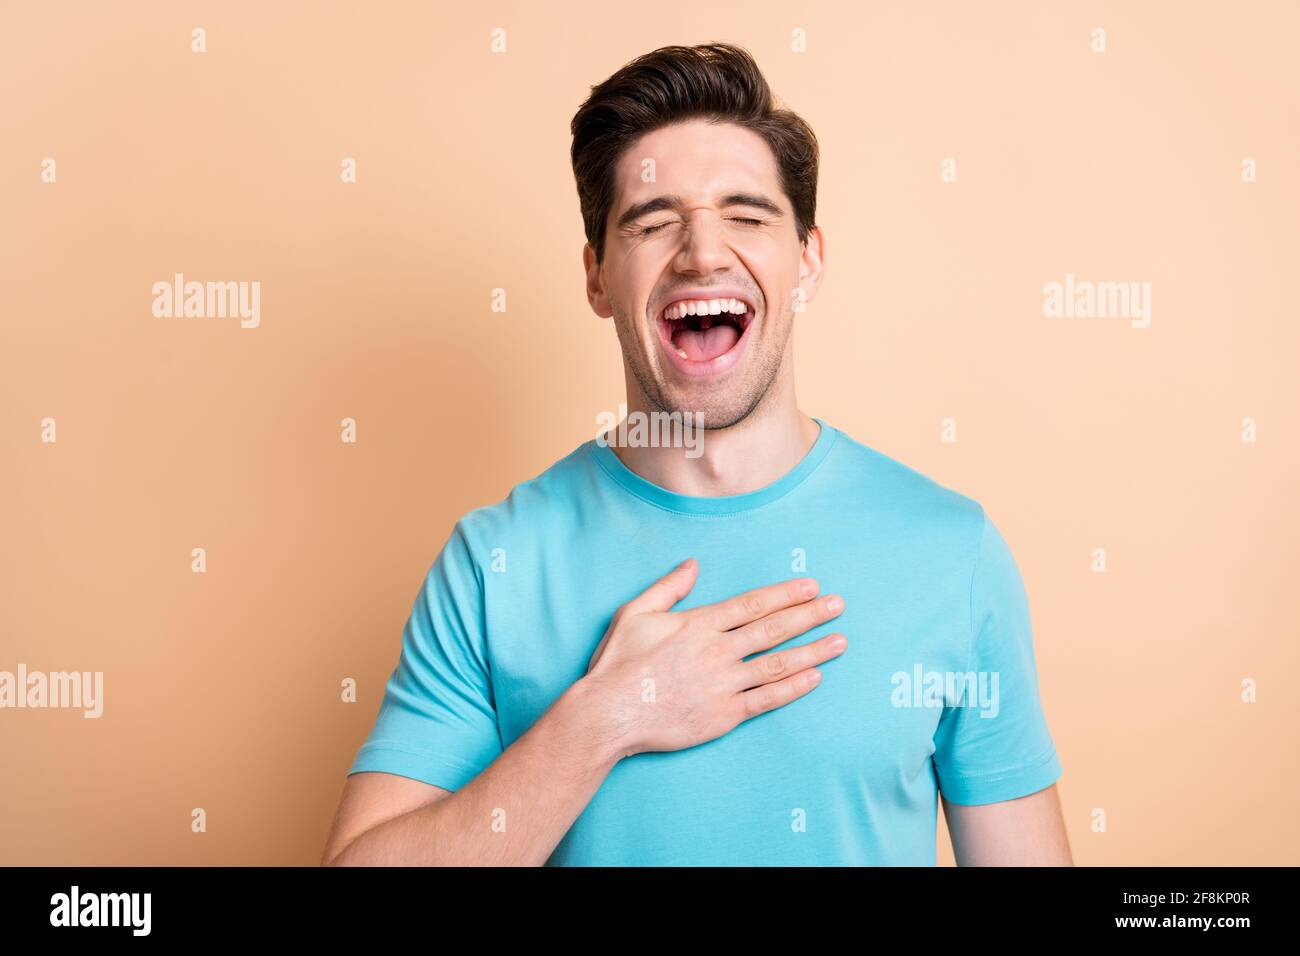 Lol Key Meaning Hilarious Humorous Or Laughing Out Loud Stock Photo - Alamy